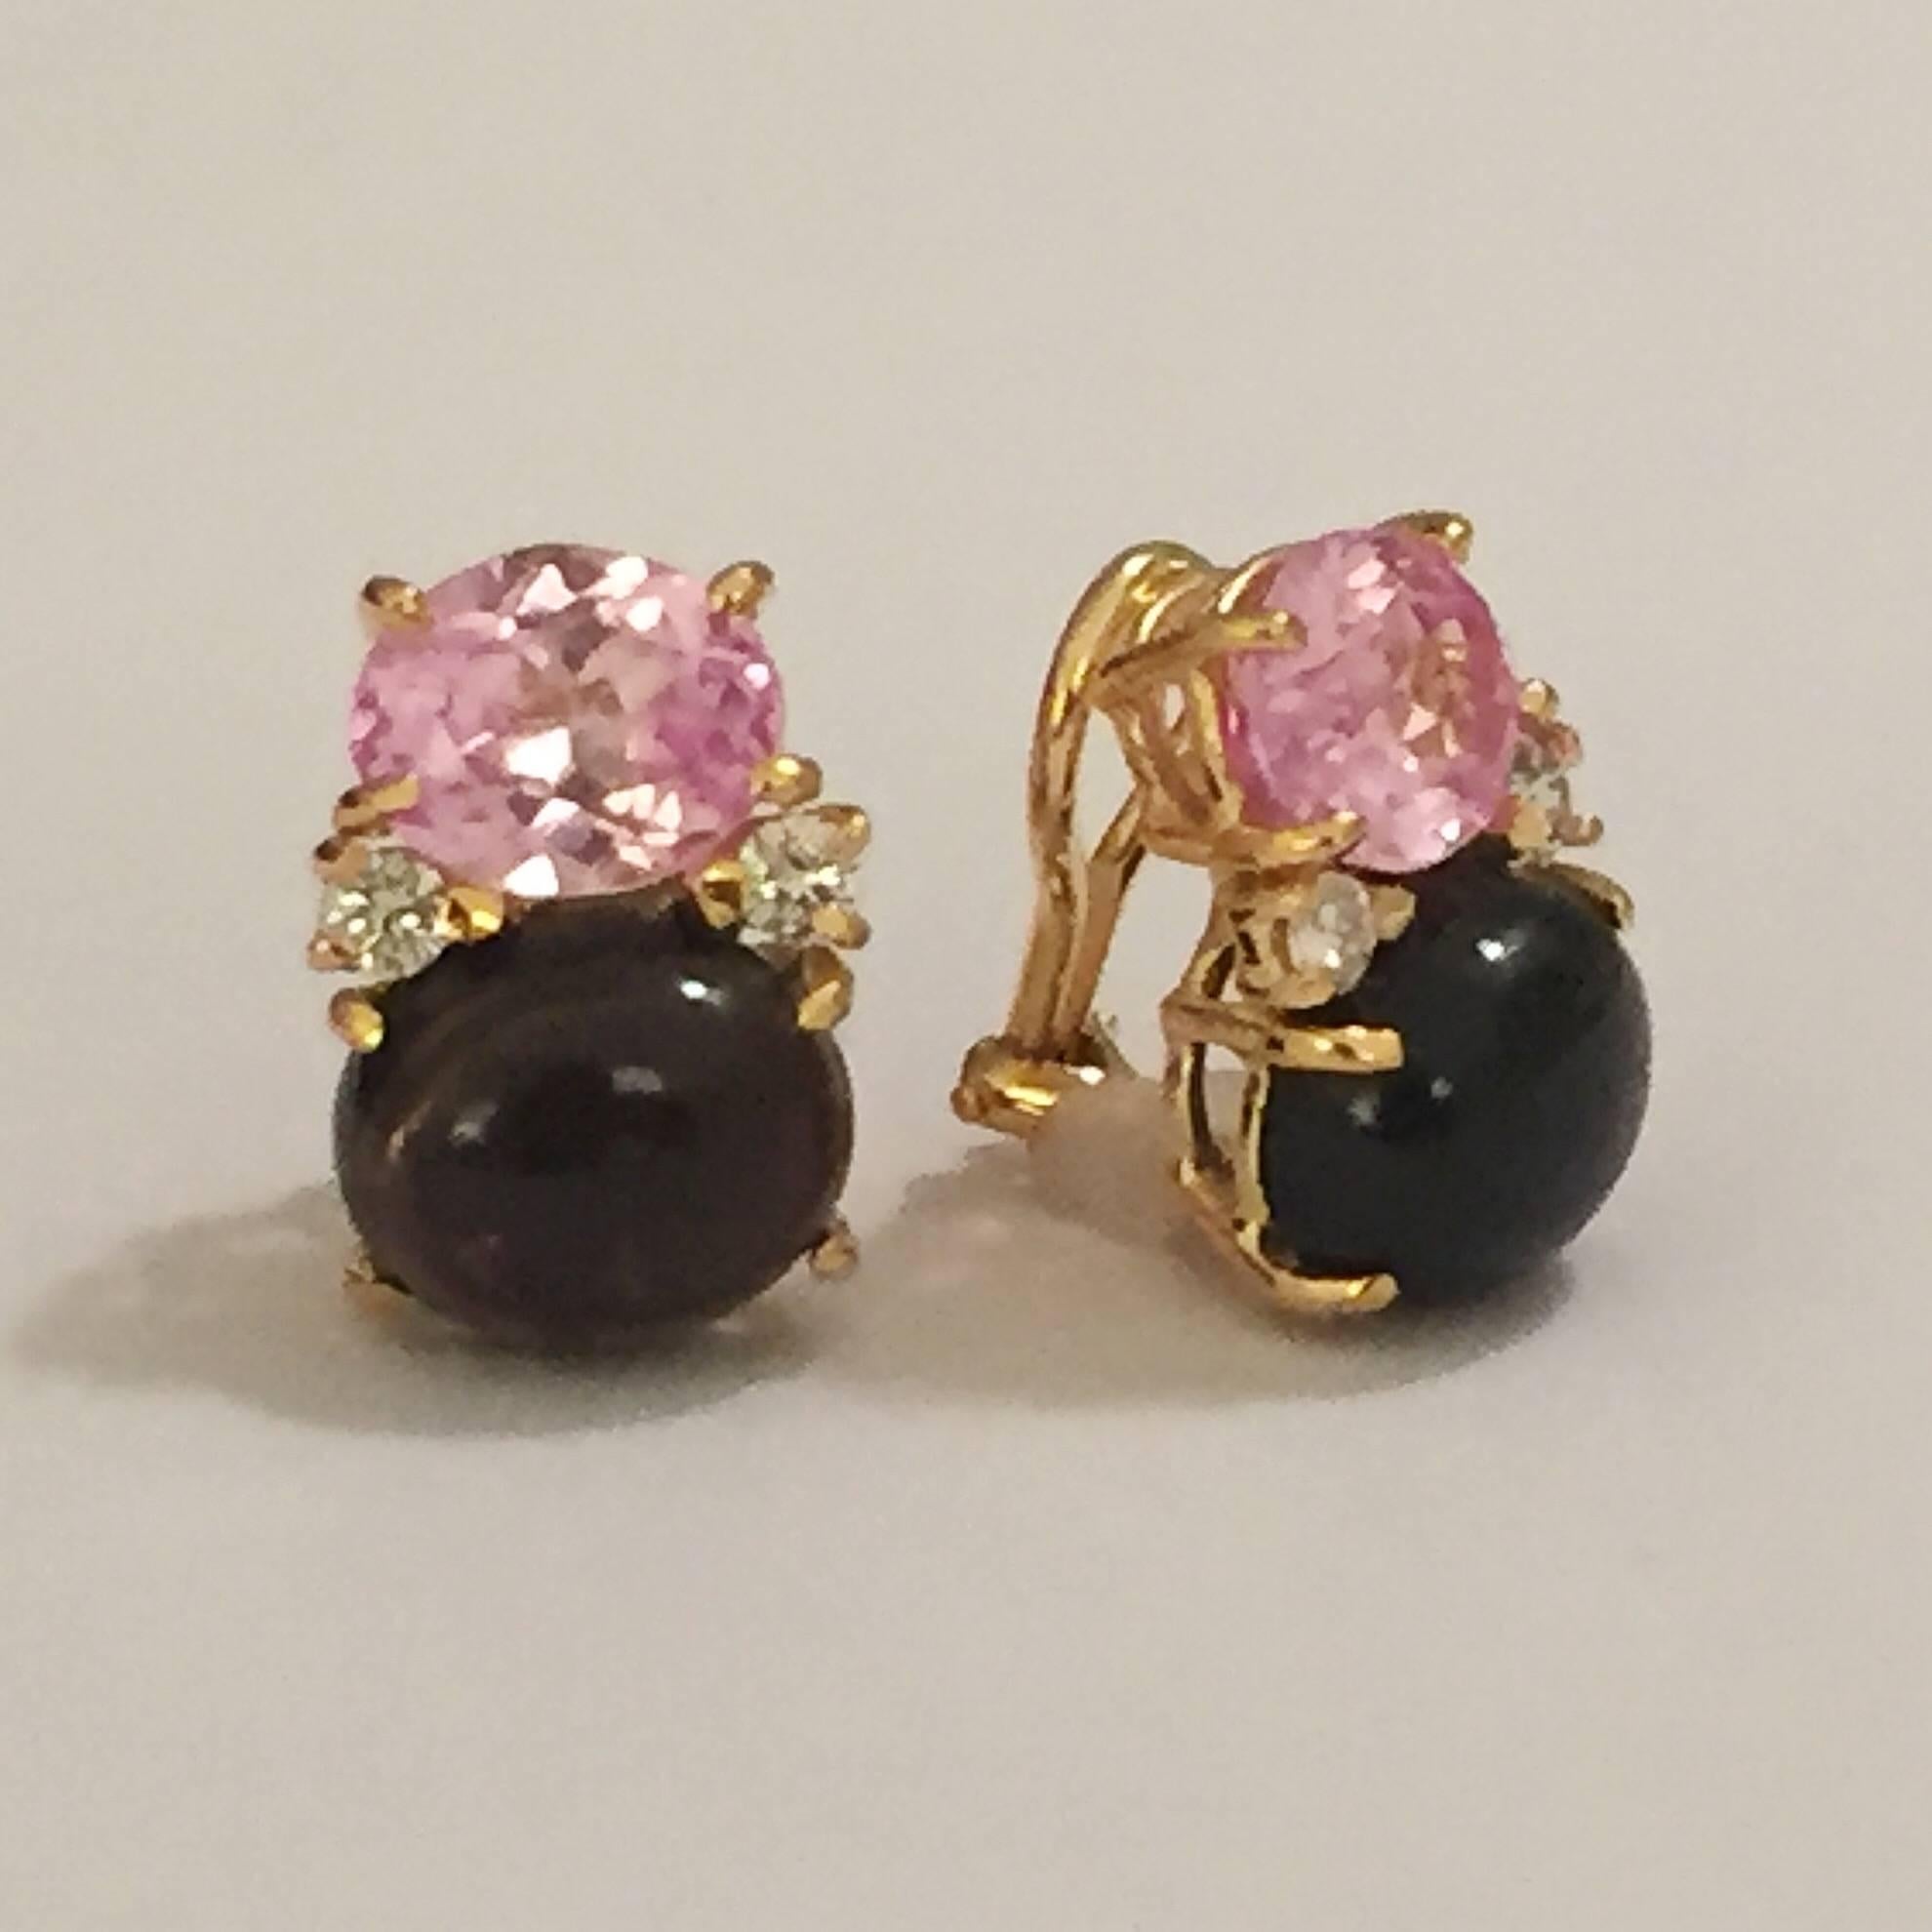 18kt Yellow Gold Large GUM DROP™ Earrings with faceted Pink Topaz and  Cabochon Smokey Topaz and diamonds.

The Pink Topaz is approximately 2.5 cts each and the Cabochon Smokey Topaz is approximately 5 cts each, and 4 diamonds weighing